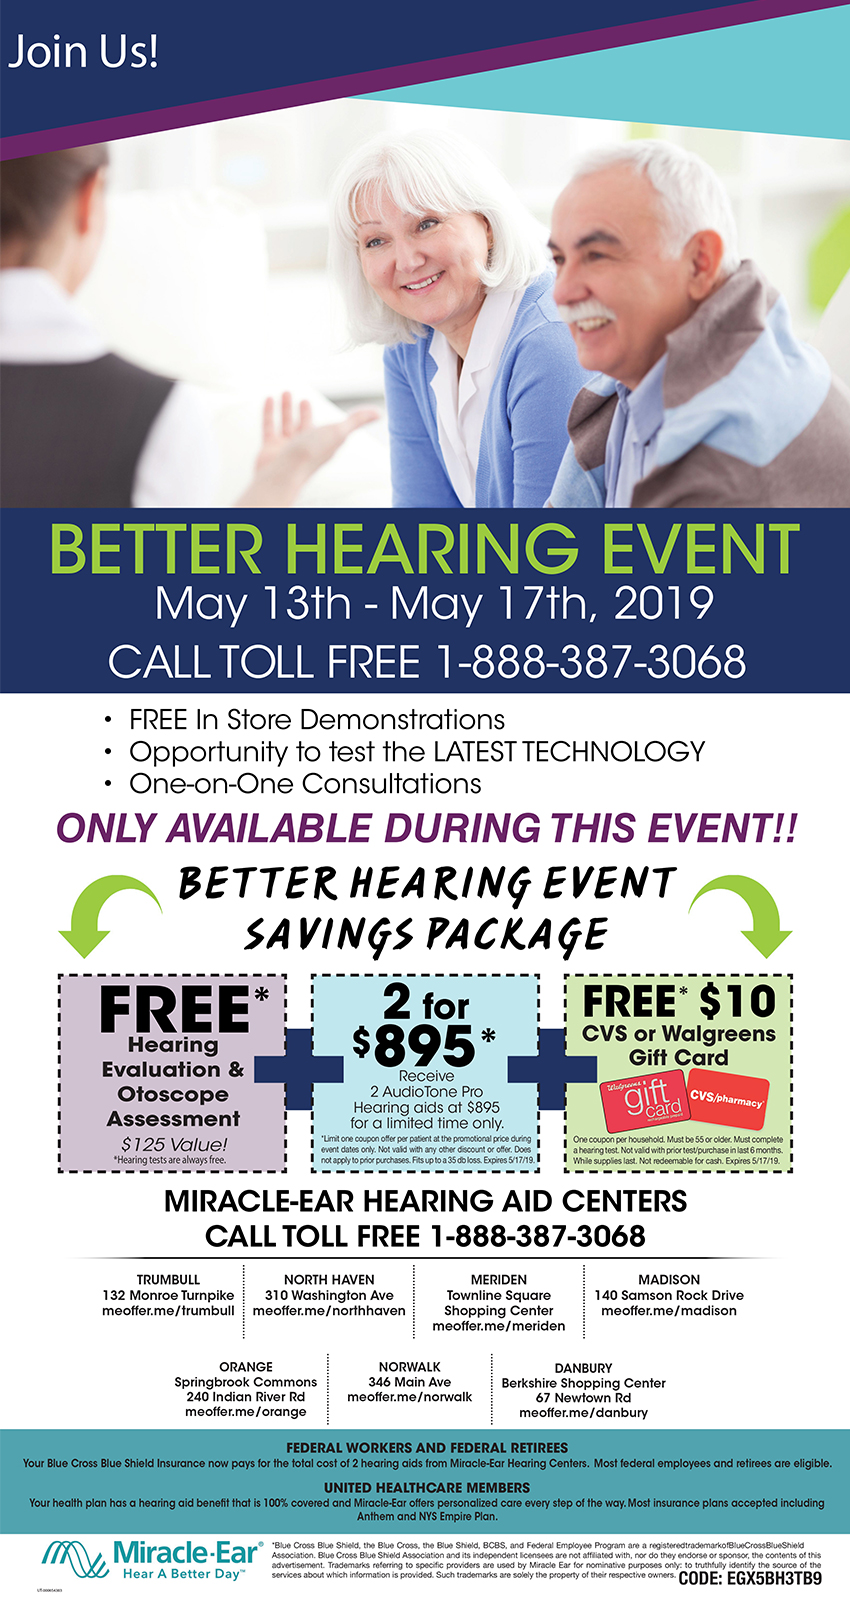 Join Us For A Better Hearing Event!